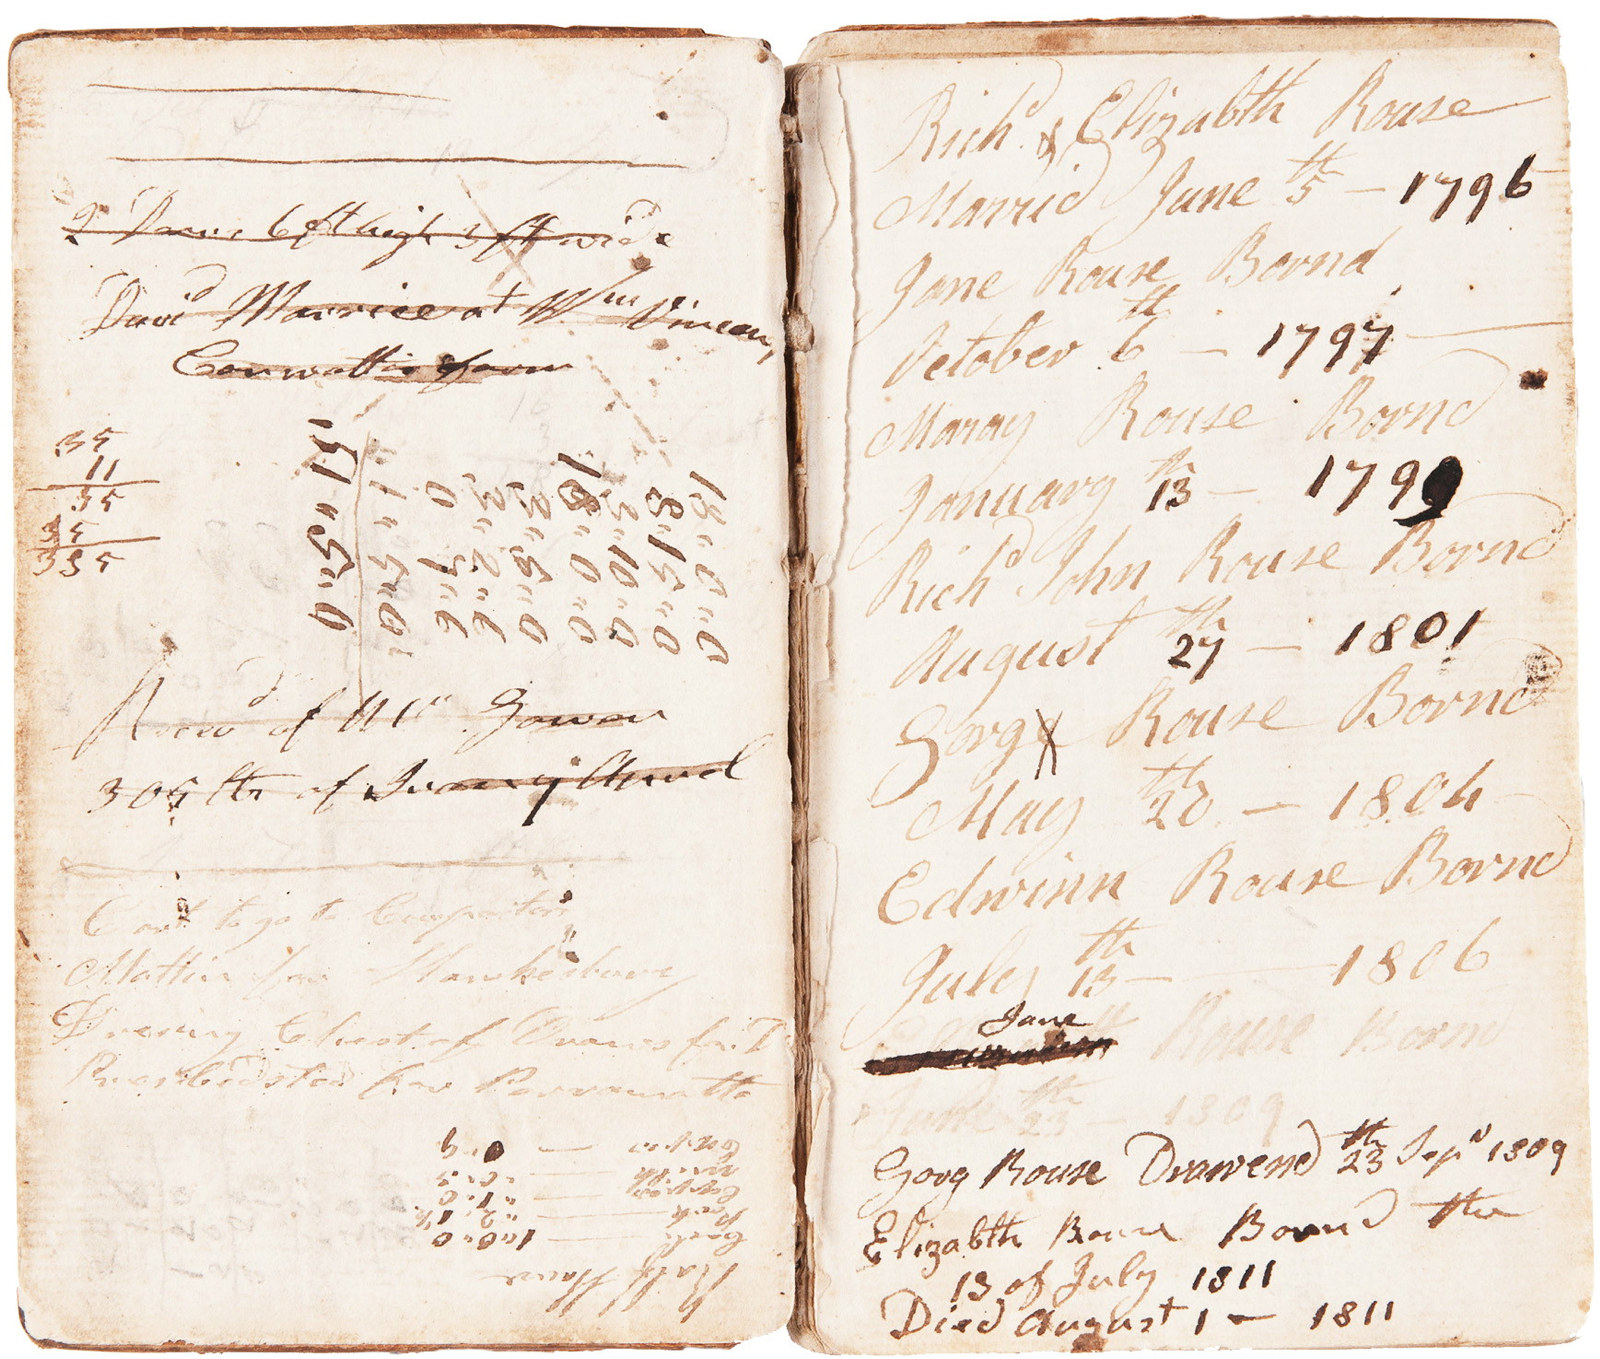 Richard Rouse and Rouse family papers: 1792-1849 (Lidstone collection)